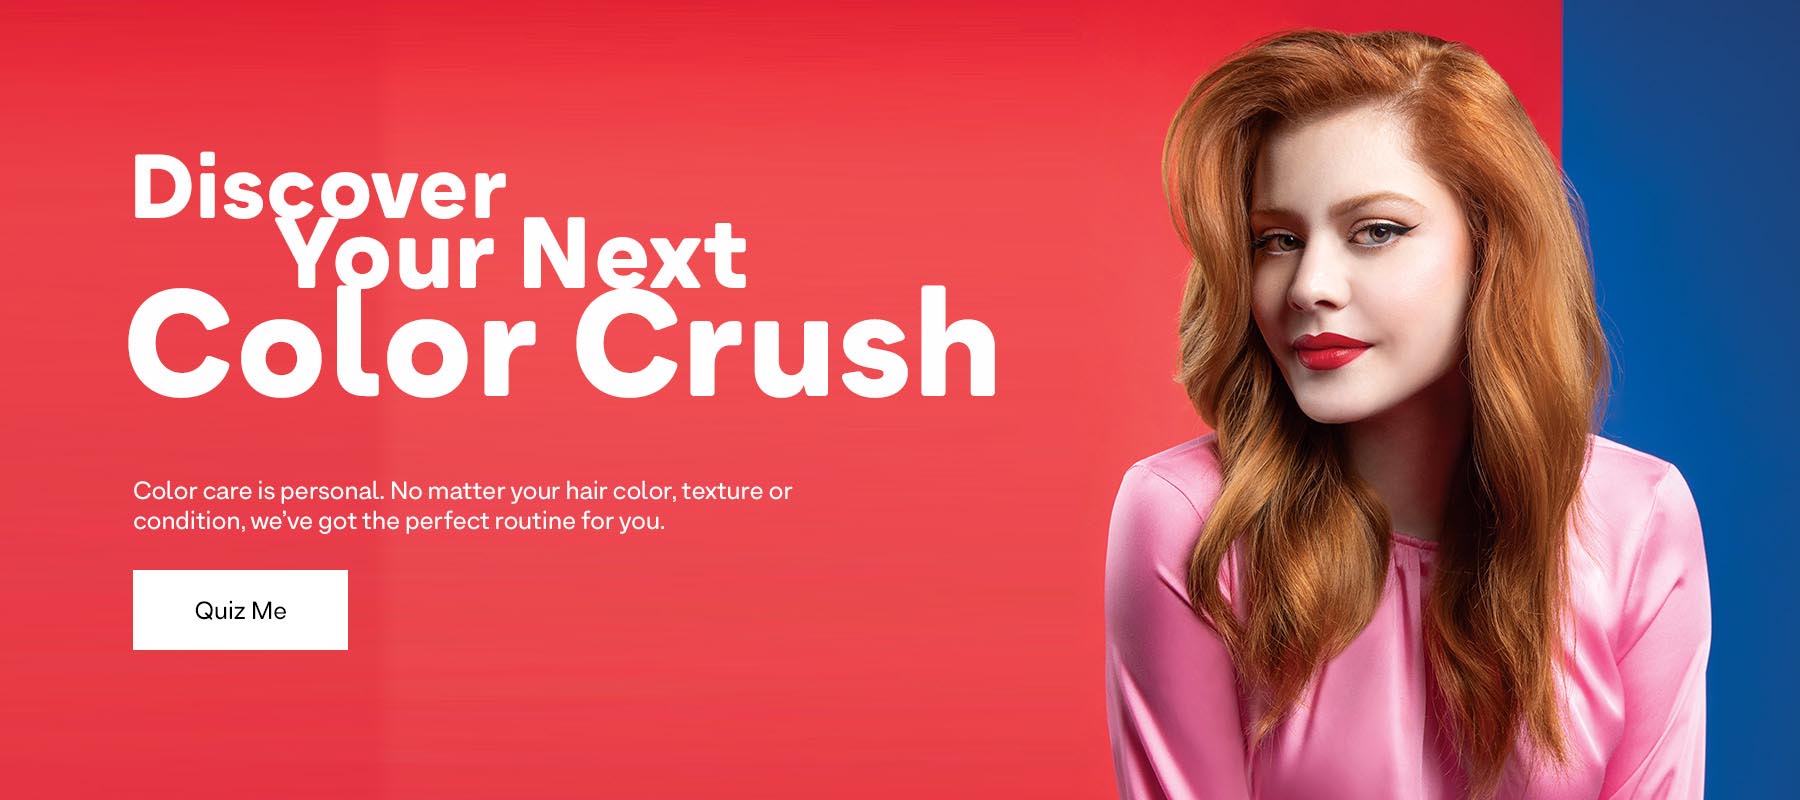 Discover your next color crush